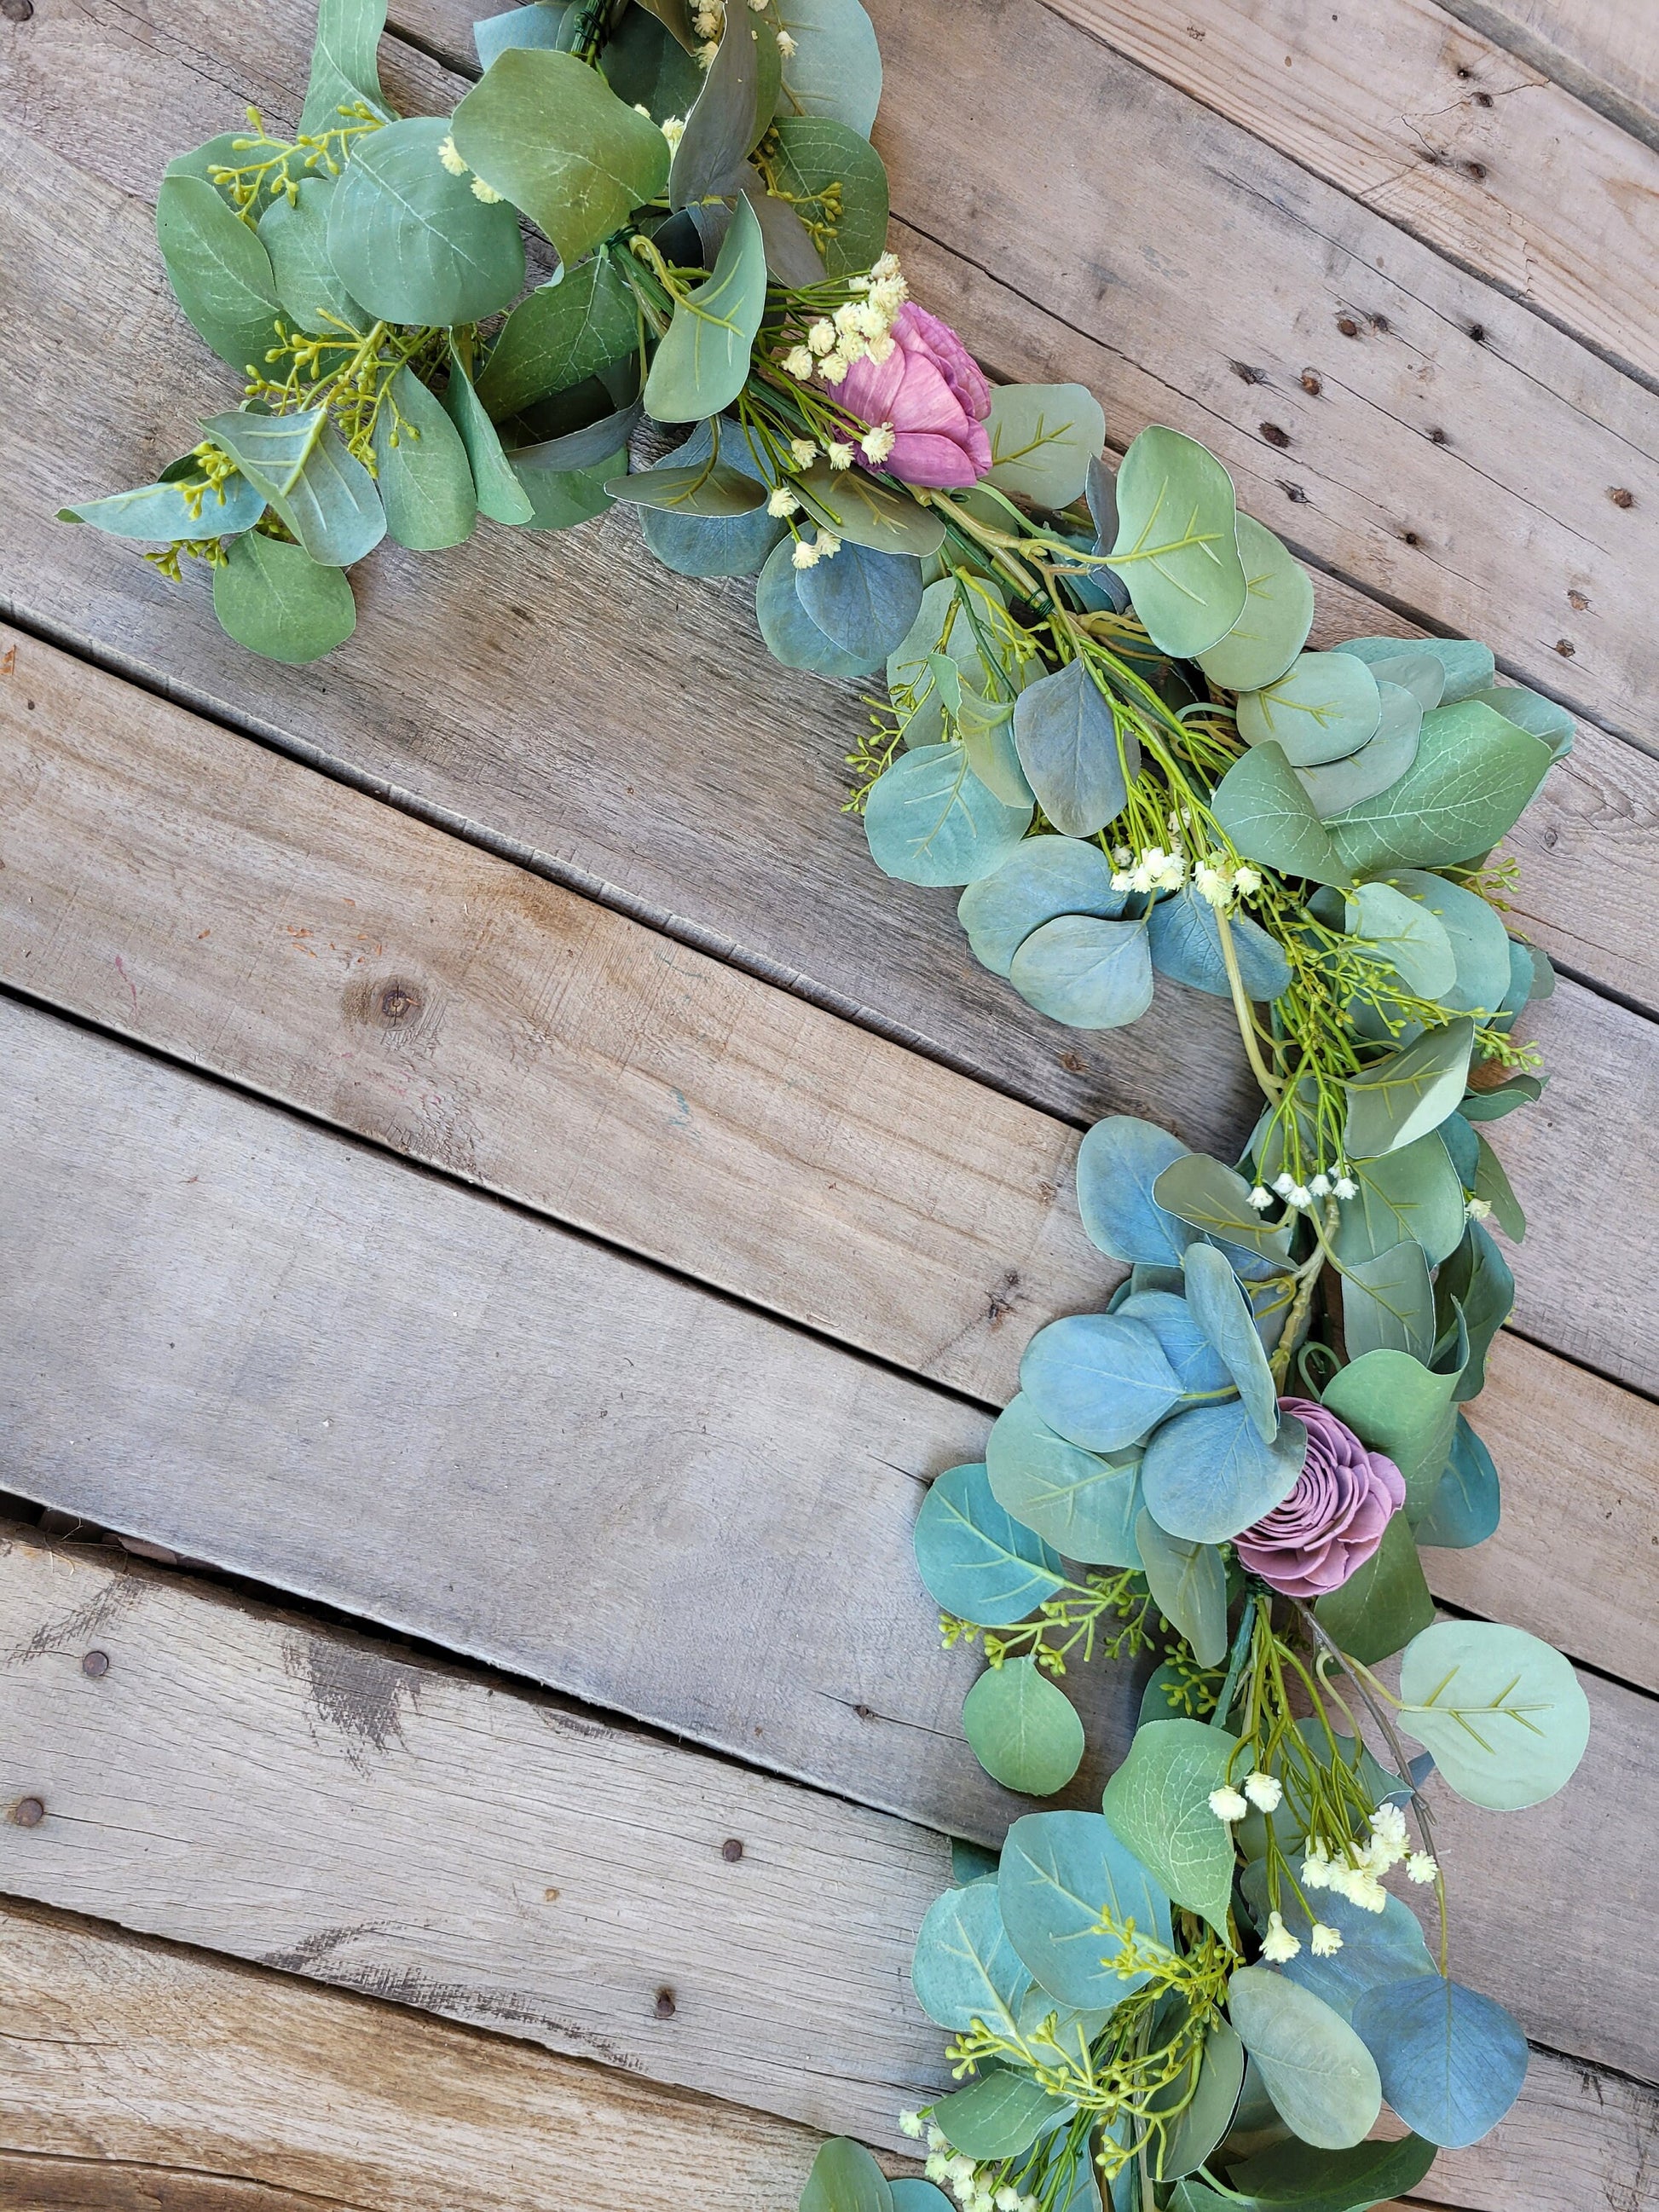 Silver Dollar Eucalyptus Table Garland with Wood Flowers and Baby's Breath, Faux Garland, Wedding Reception Decor, Table Runner